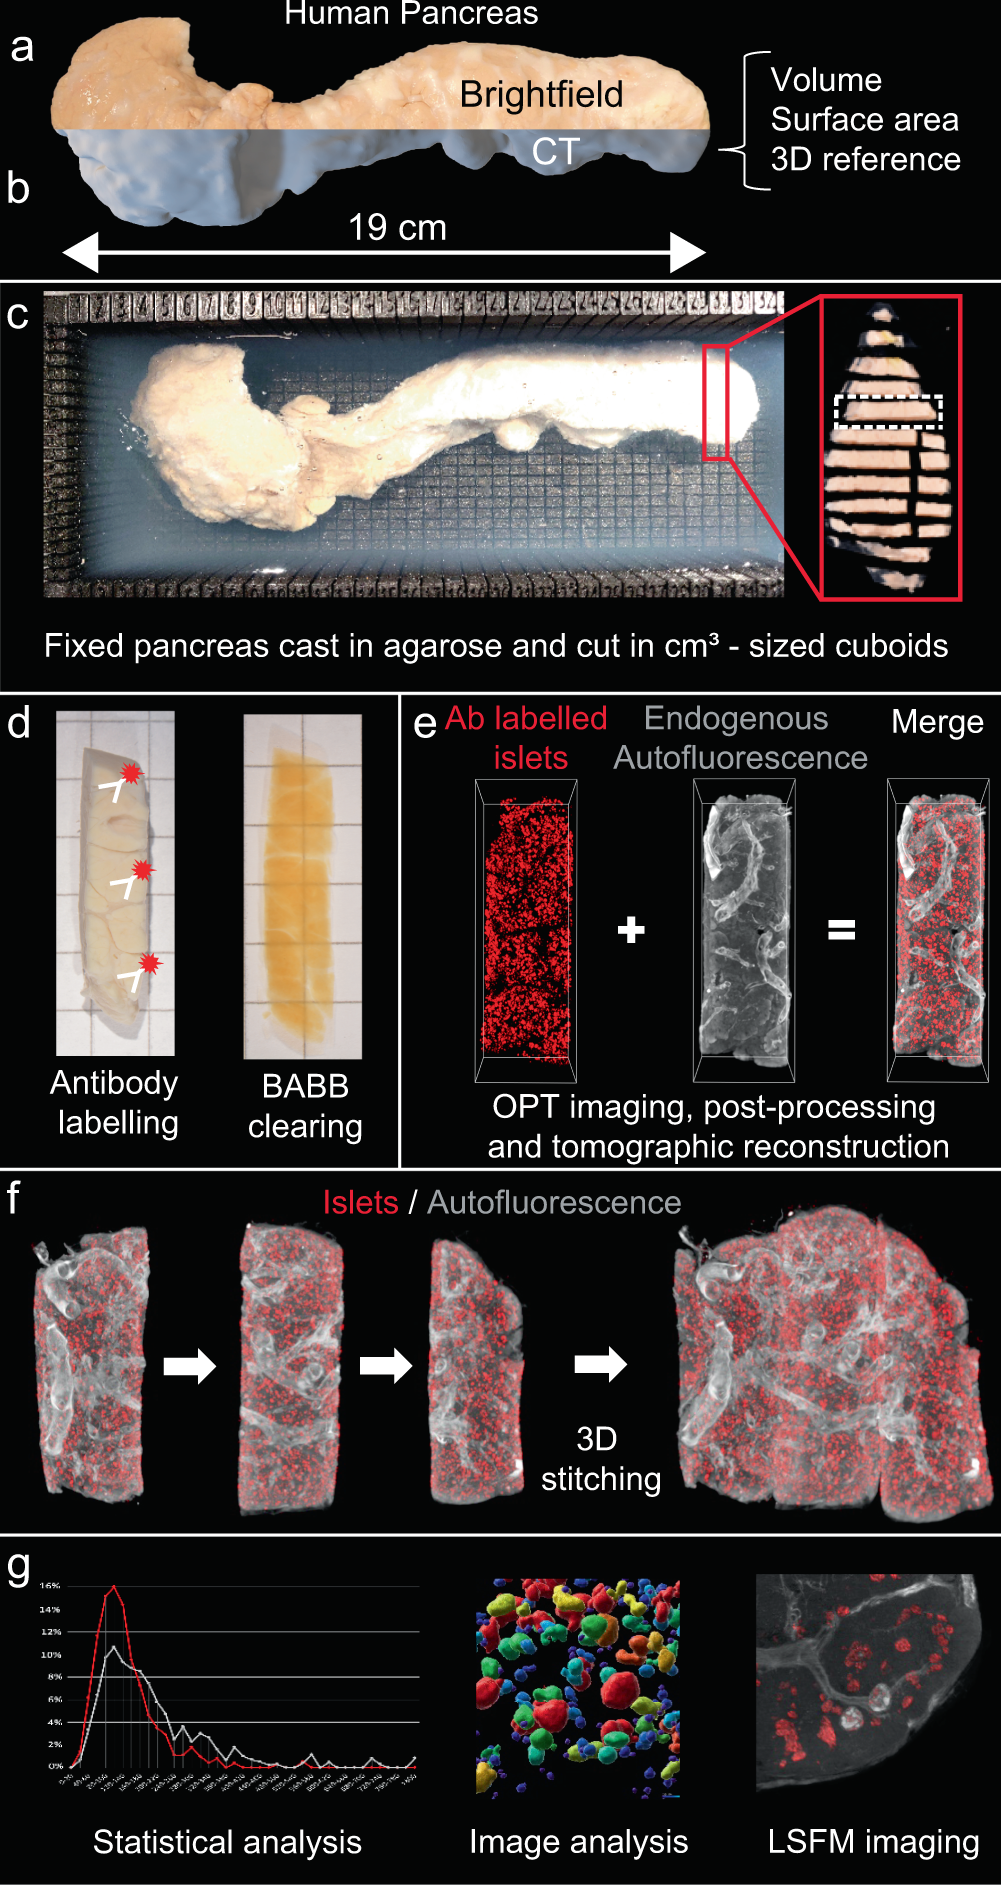 3D imaging of human organs with micrometer resolution - applied to the endocrine pancreas | Communications Biology